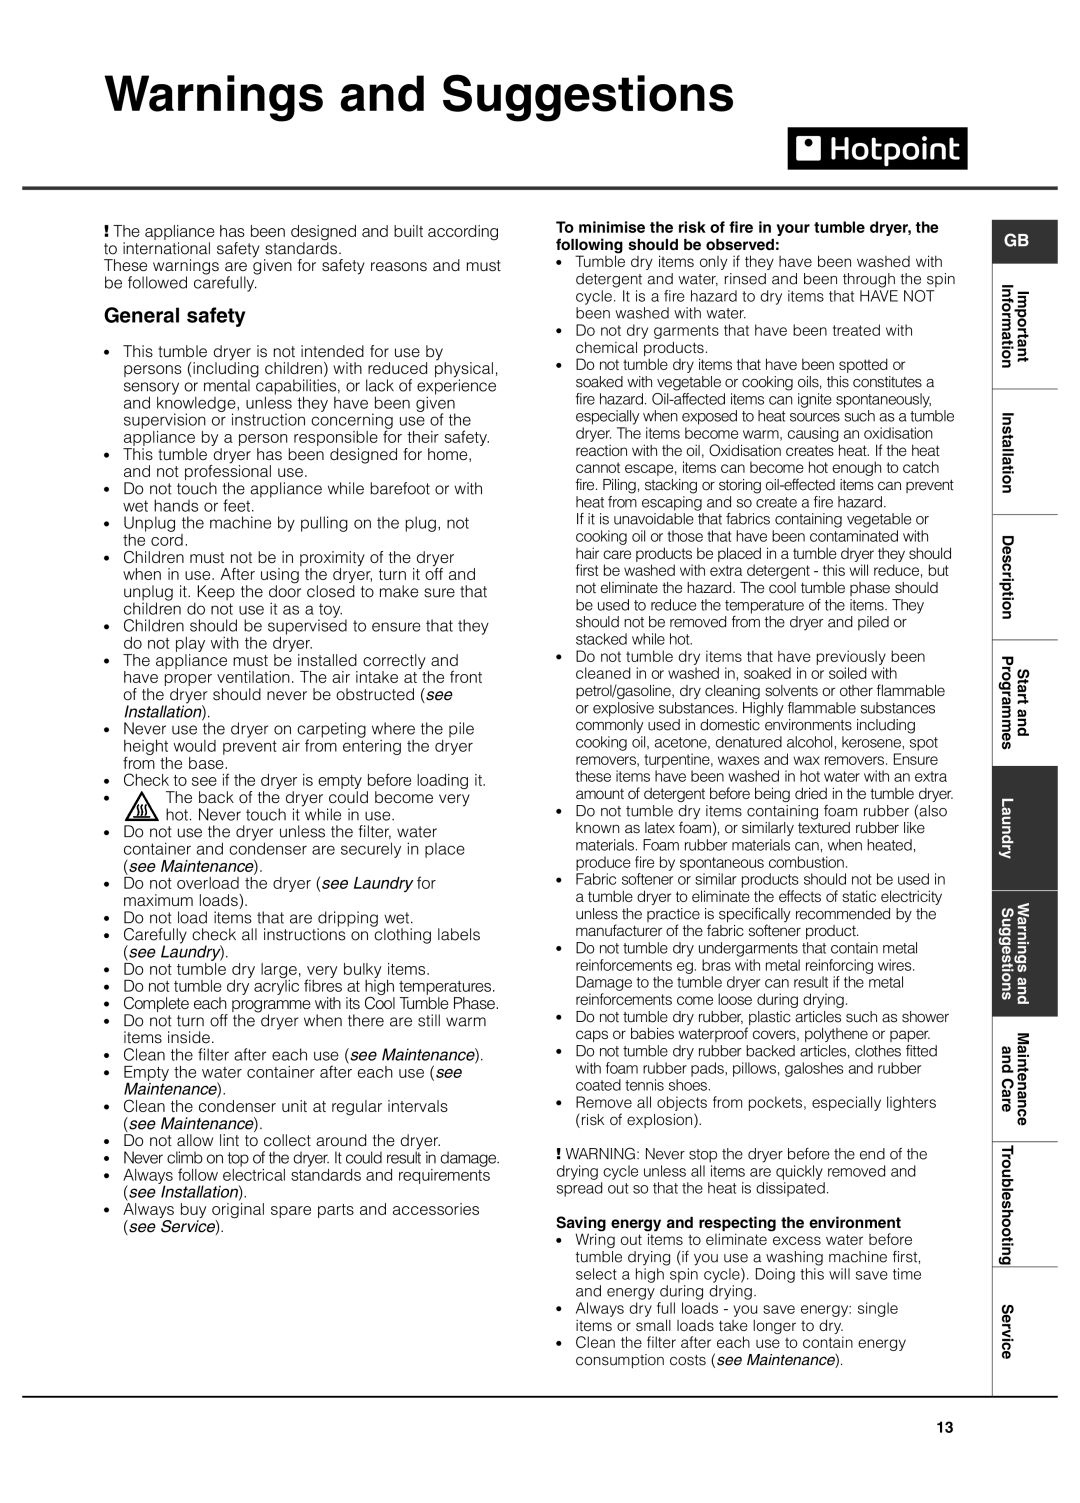 Hotpoint TCEl 87B Experience manual Warnings and Suggestions, General safety 